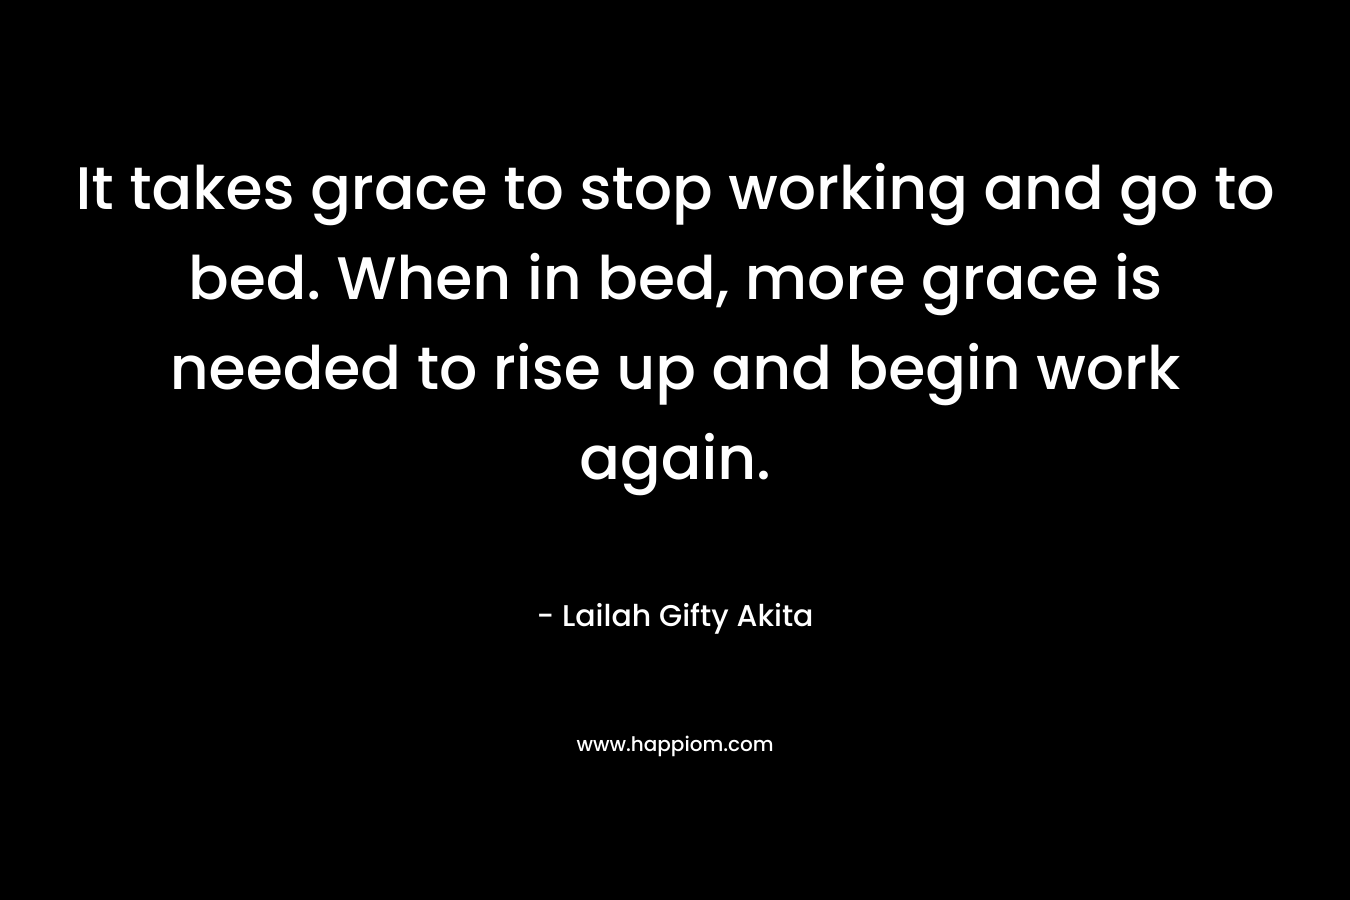 It takes grace to stop working and go to bed. When in bed, more grace is needed to rise up and begin work again.